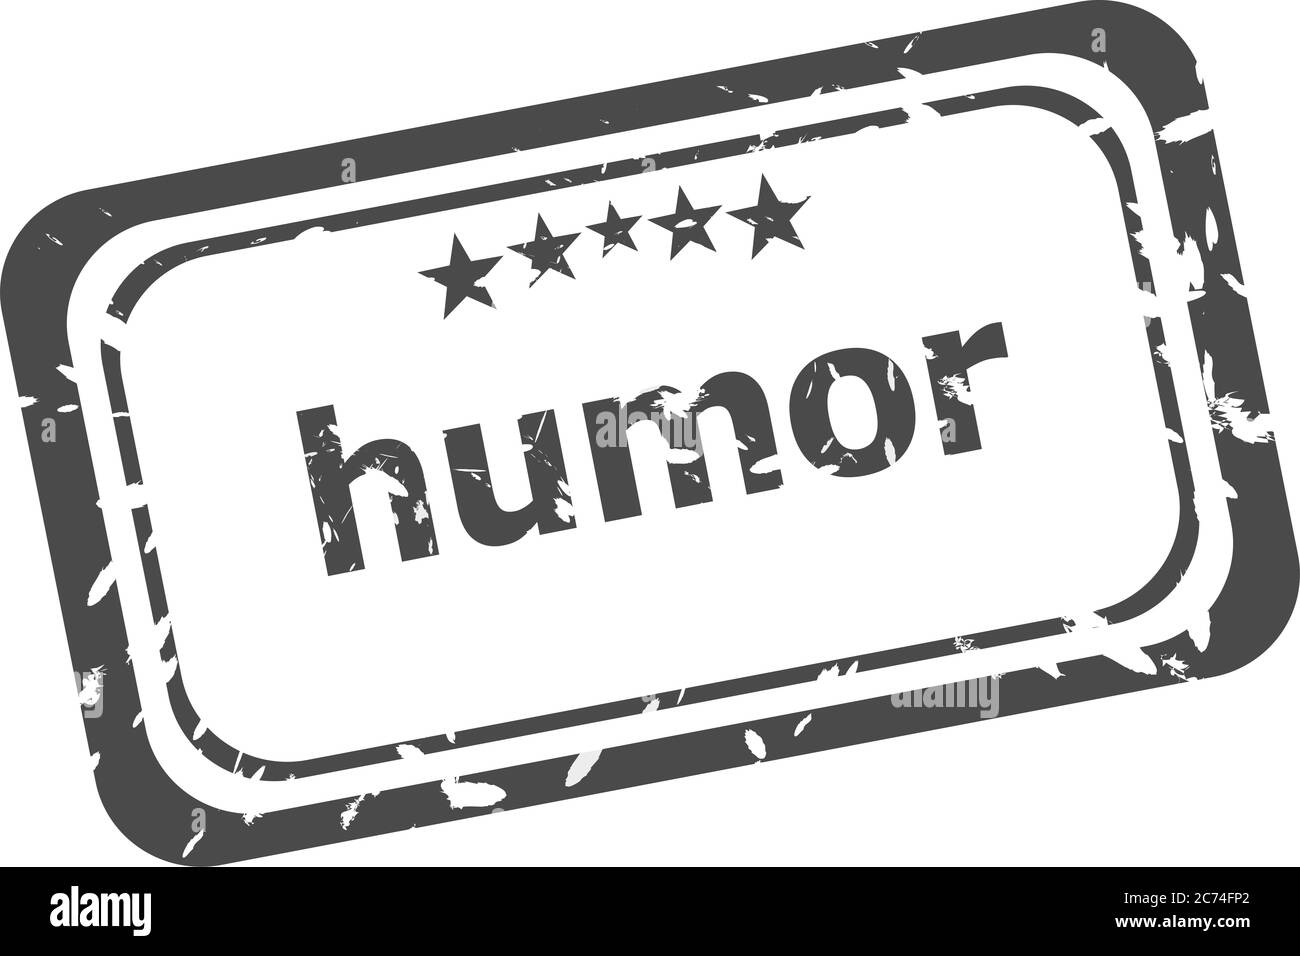 humor grunge rubber stamp isolated on white background Stock Photo